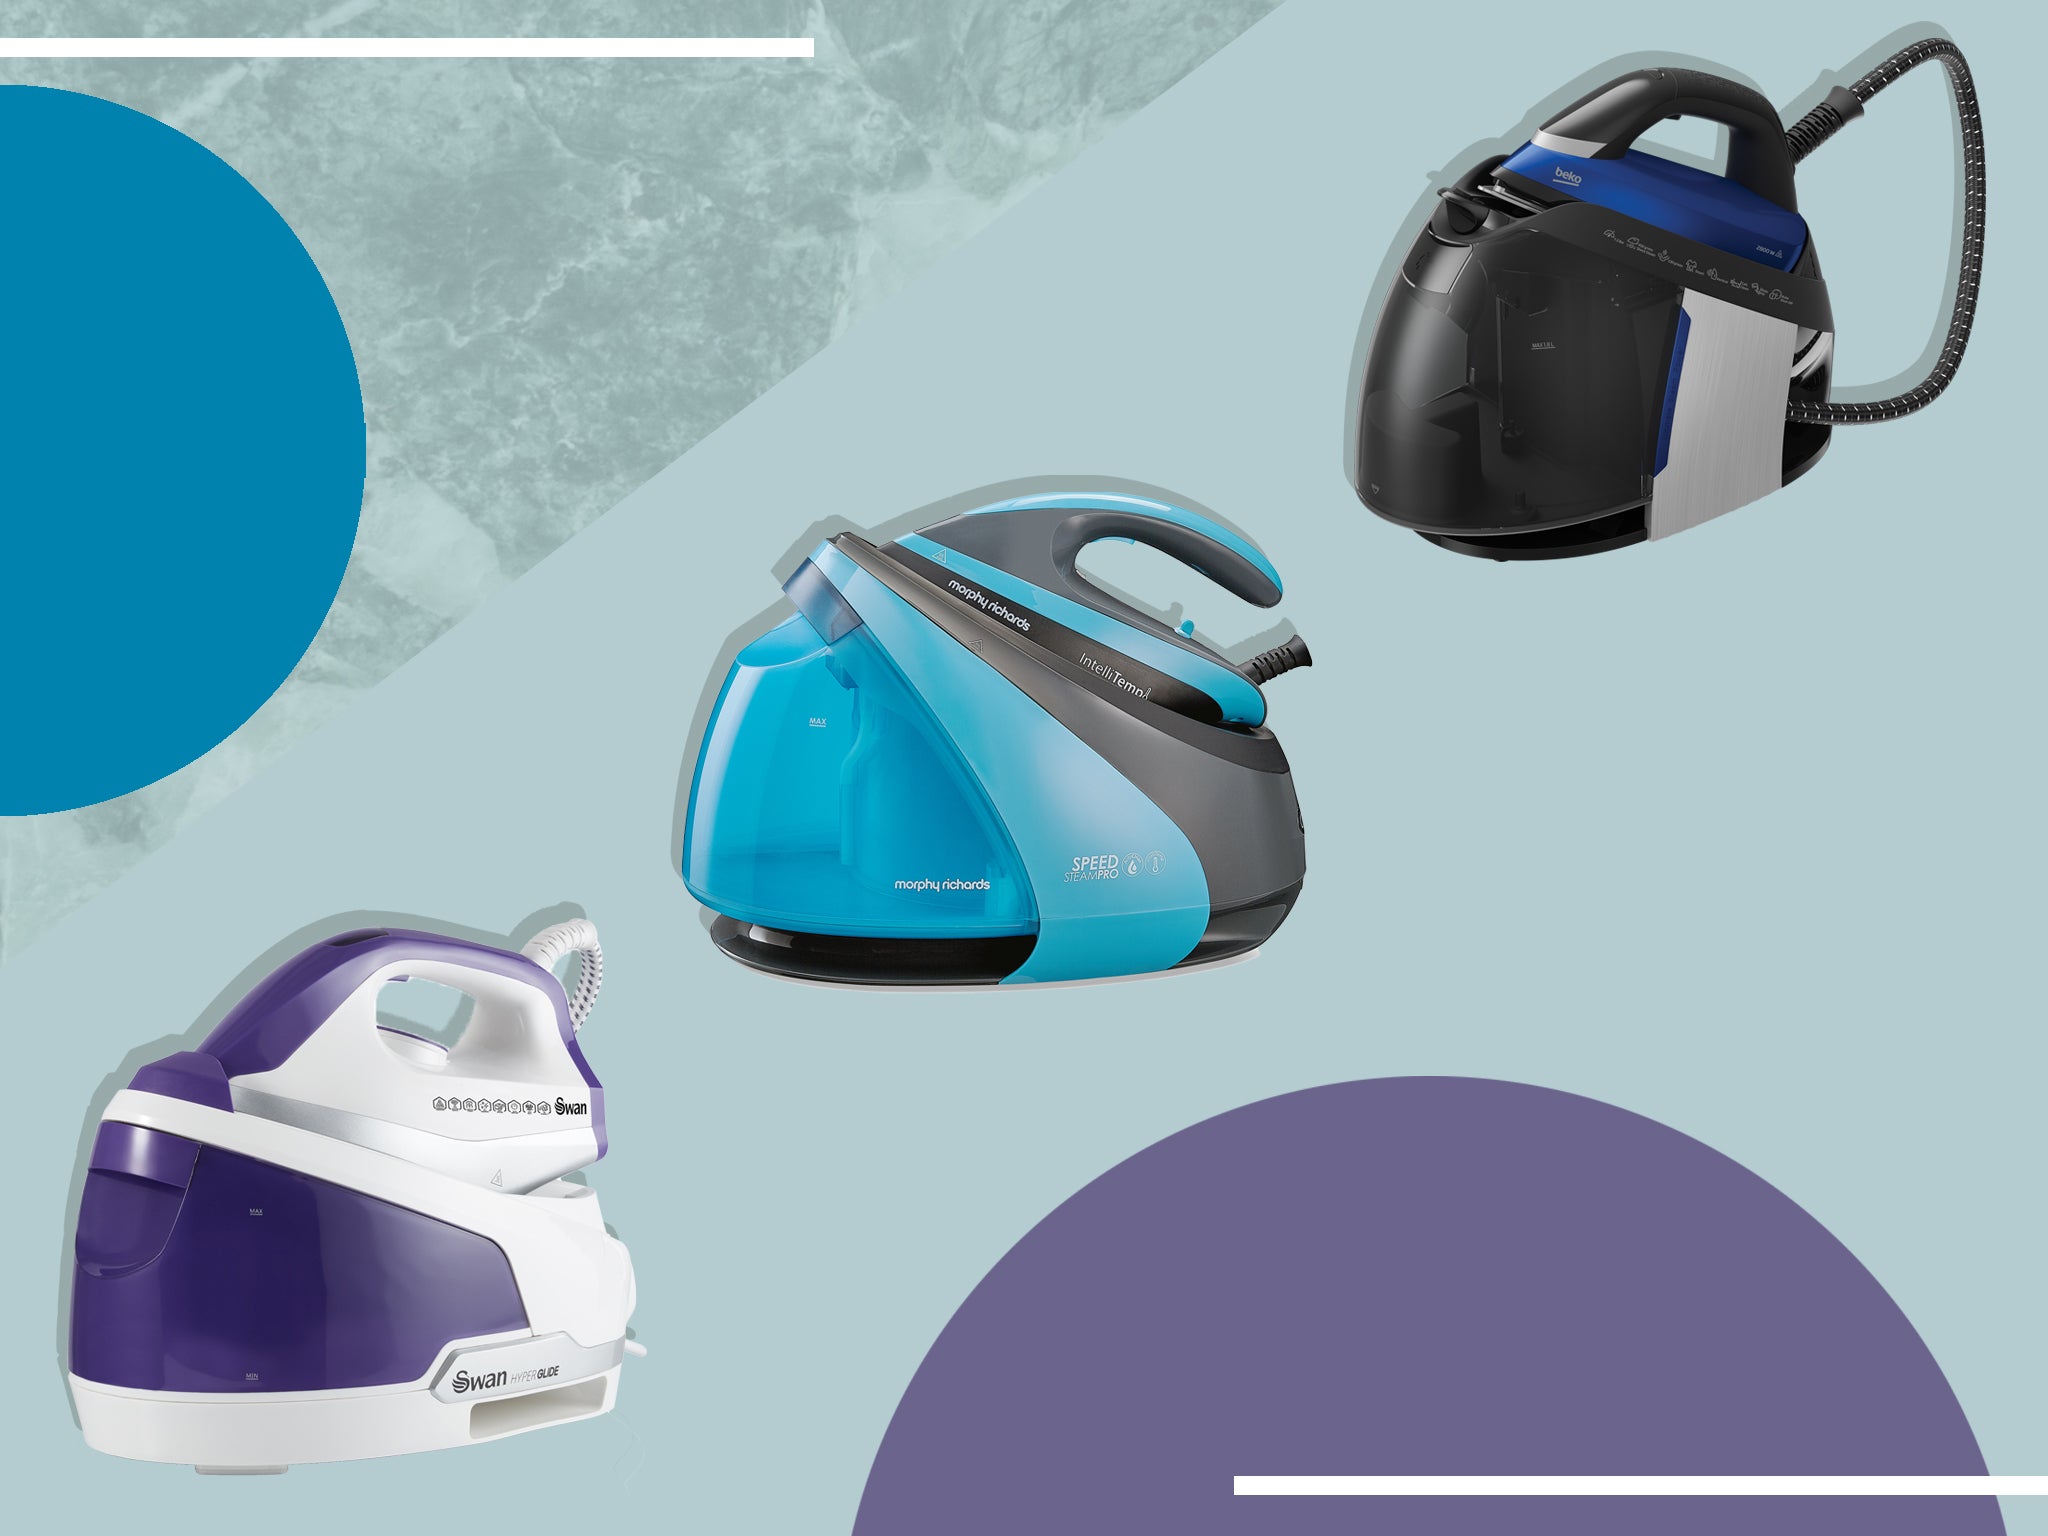 8 best steam irons to smooth away even the most stubborn creases